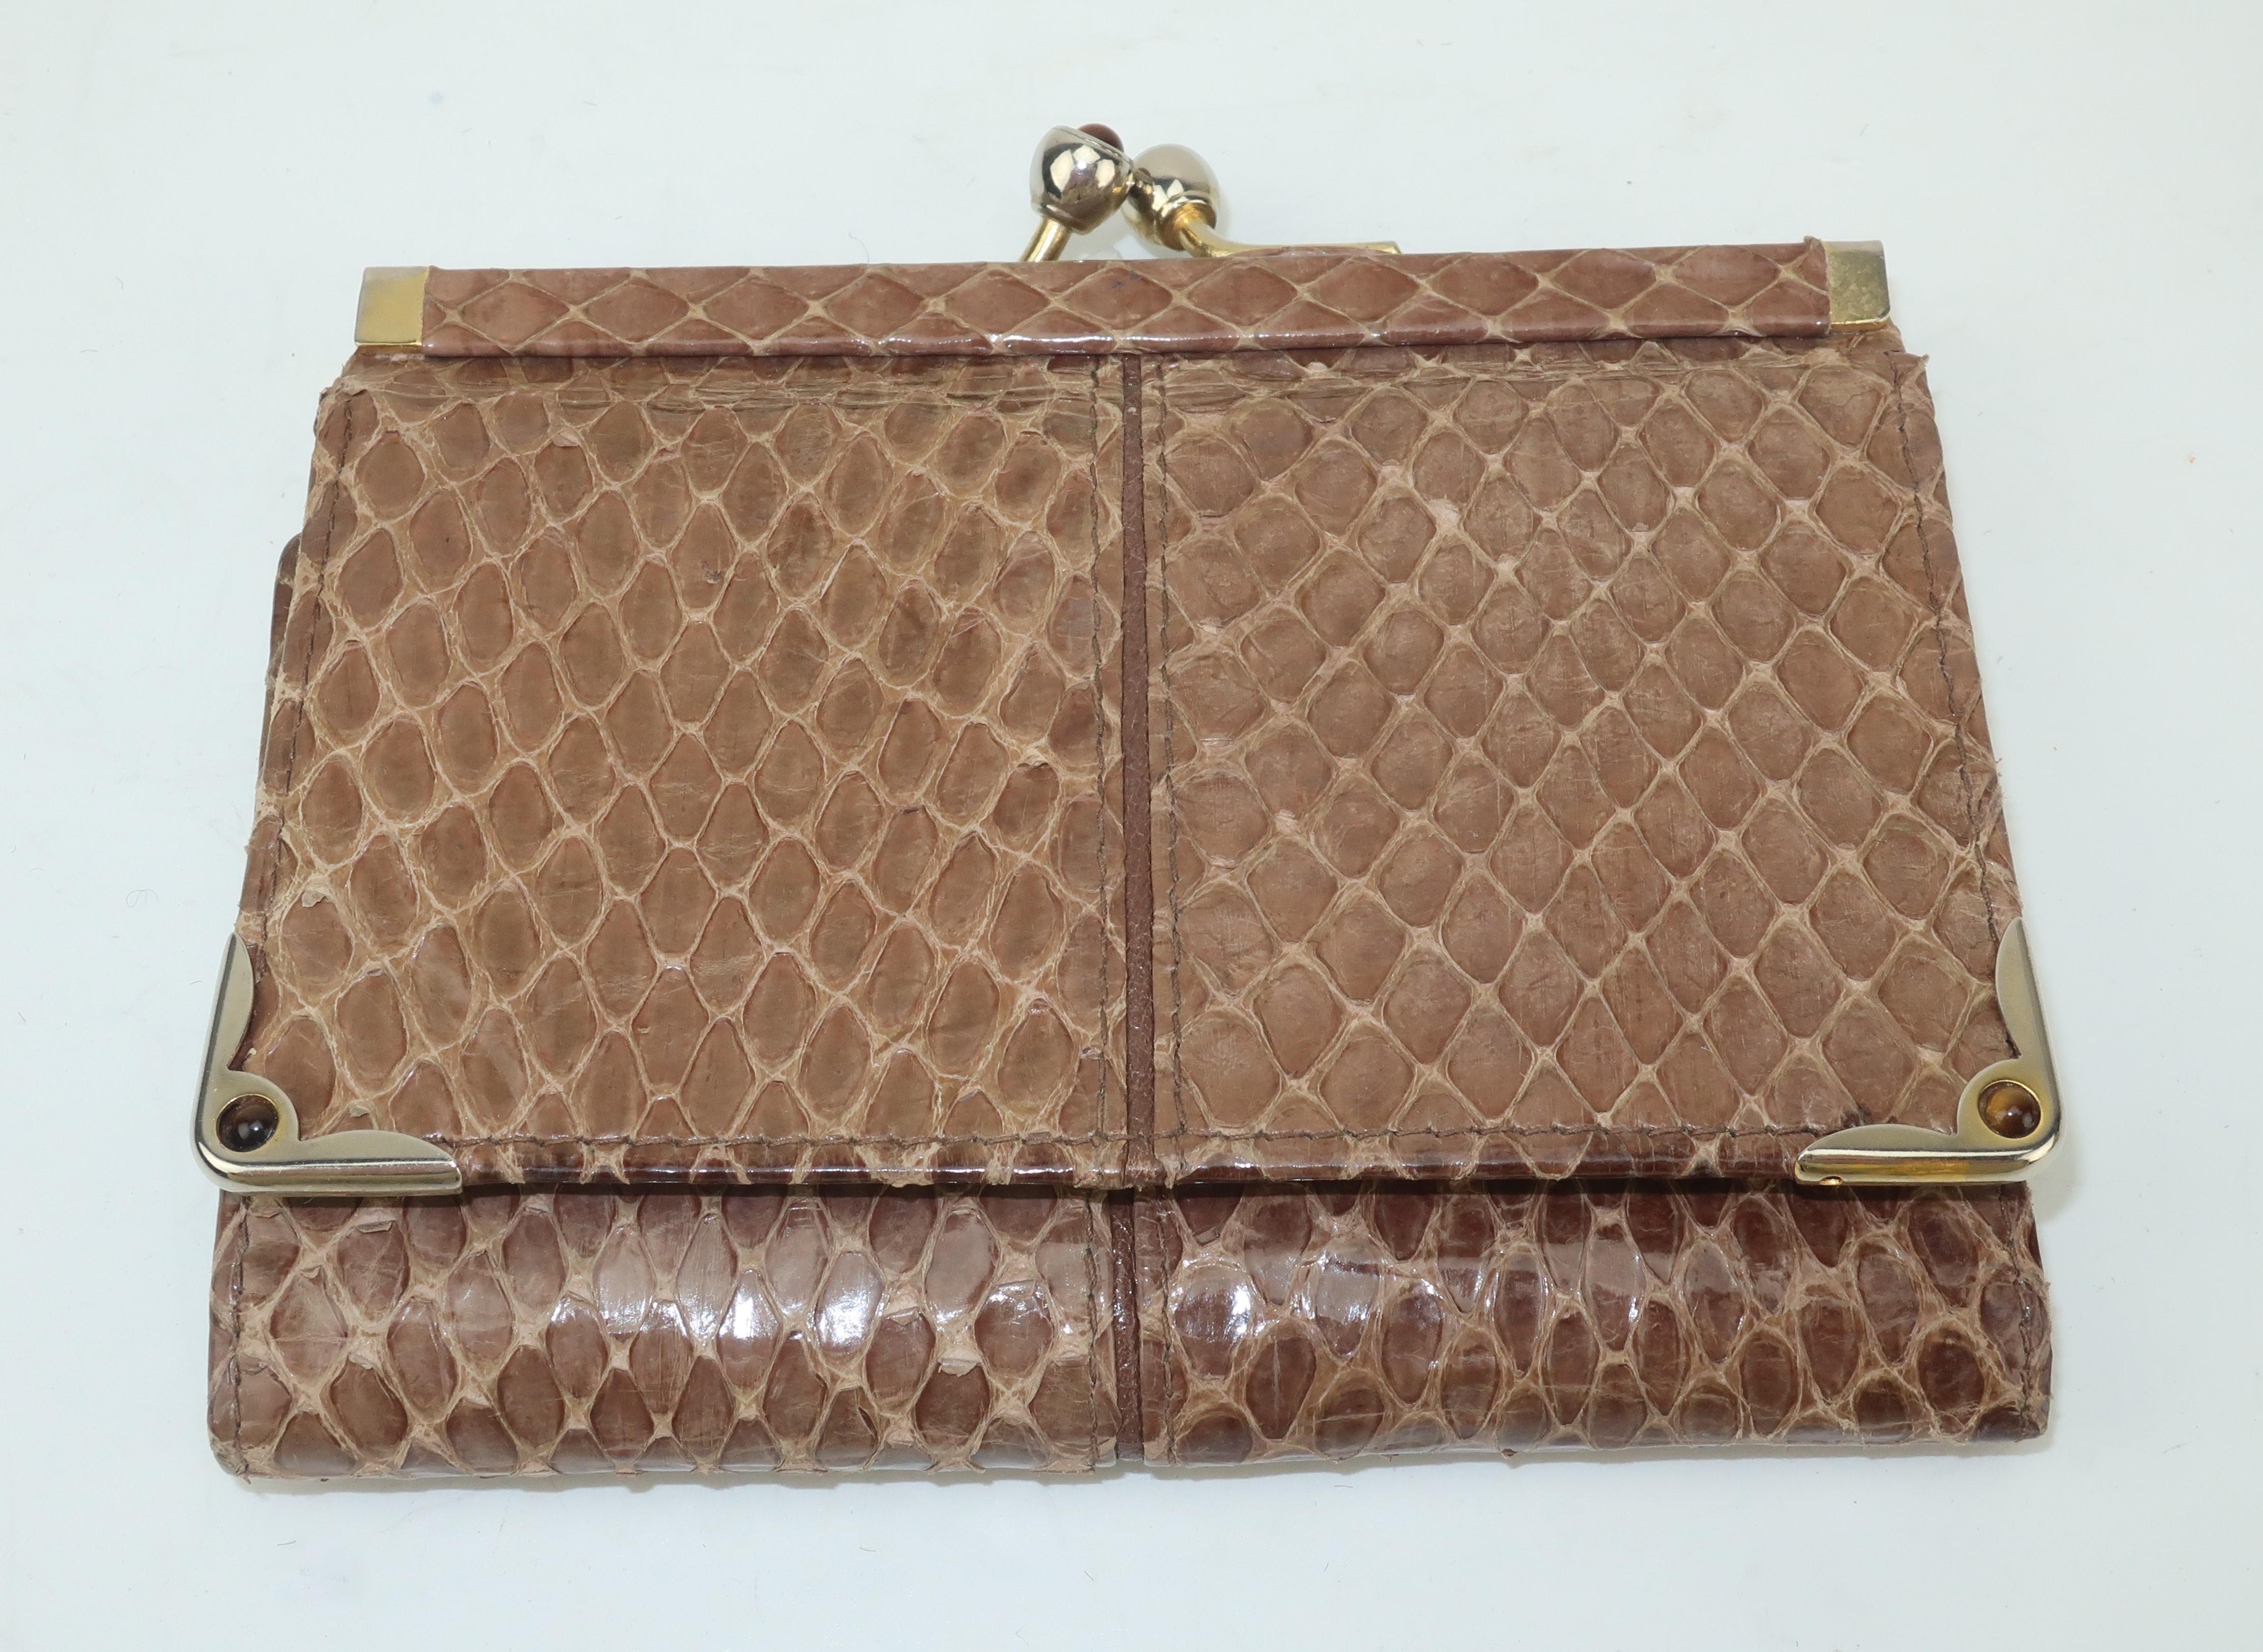 This small scale Judith Leiber taupe snakeskin wallet is a tri-fold design with gold tone corners and a kiss lock closure adorned with tiger’s eye stones.  The wallet snaps open to reveal a taupe leather interior featuring a large slot for bills and